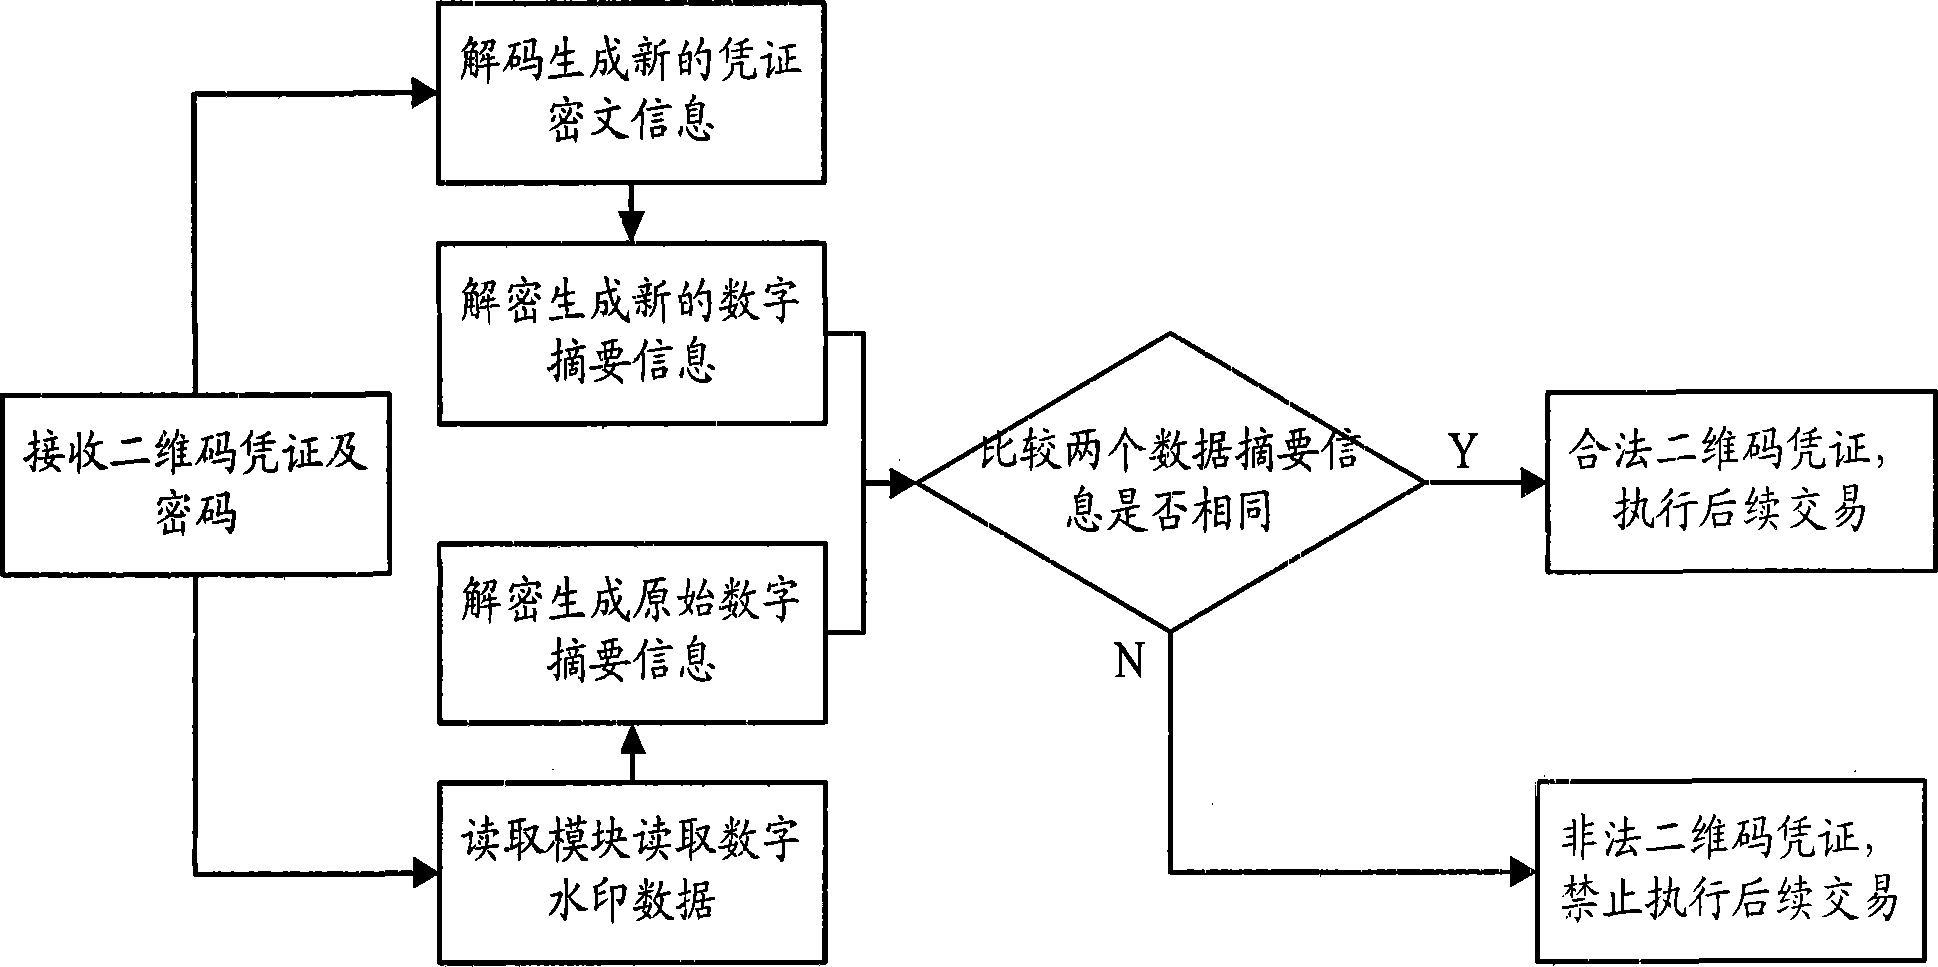 Method for generating and checking electronic check two-dimension code credence